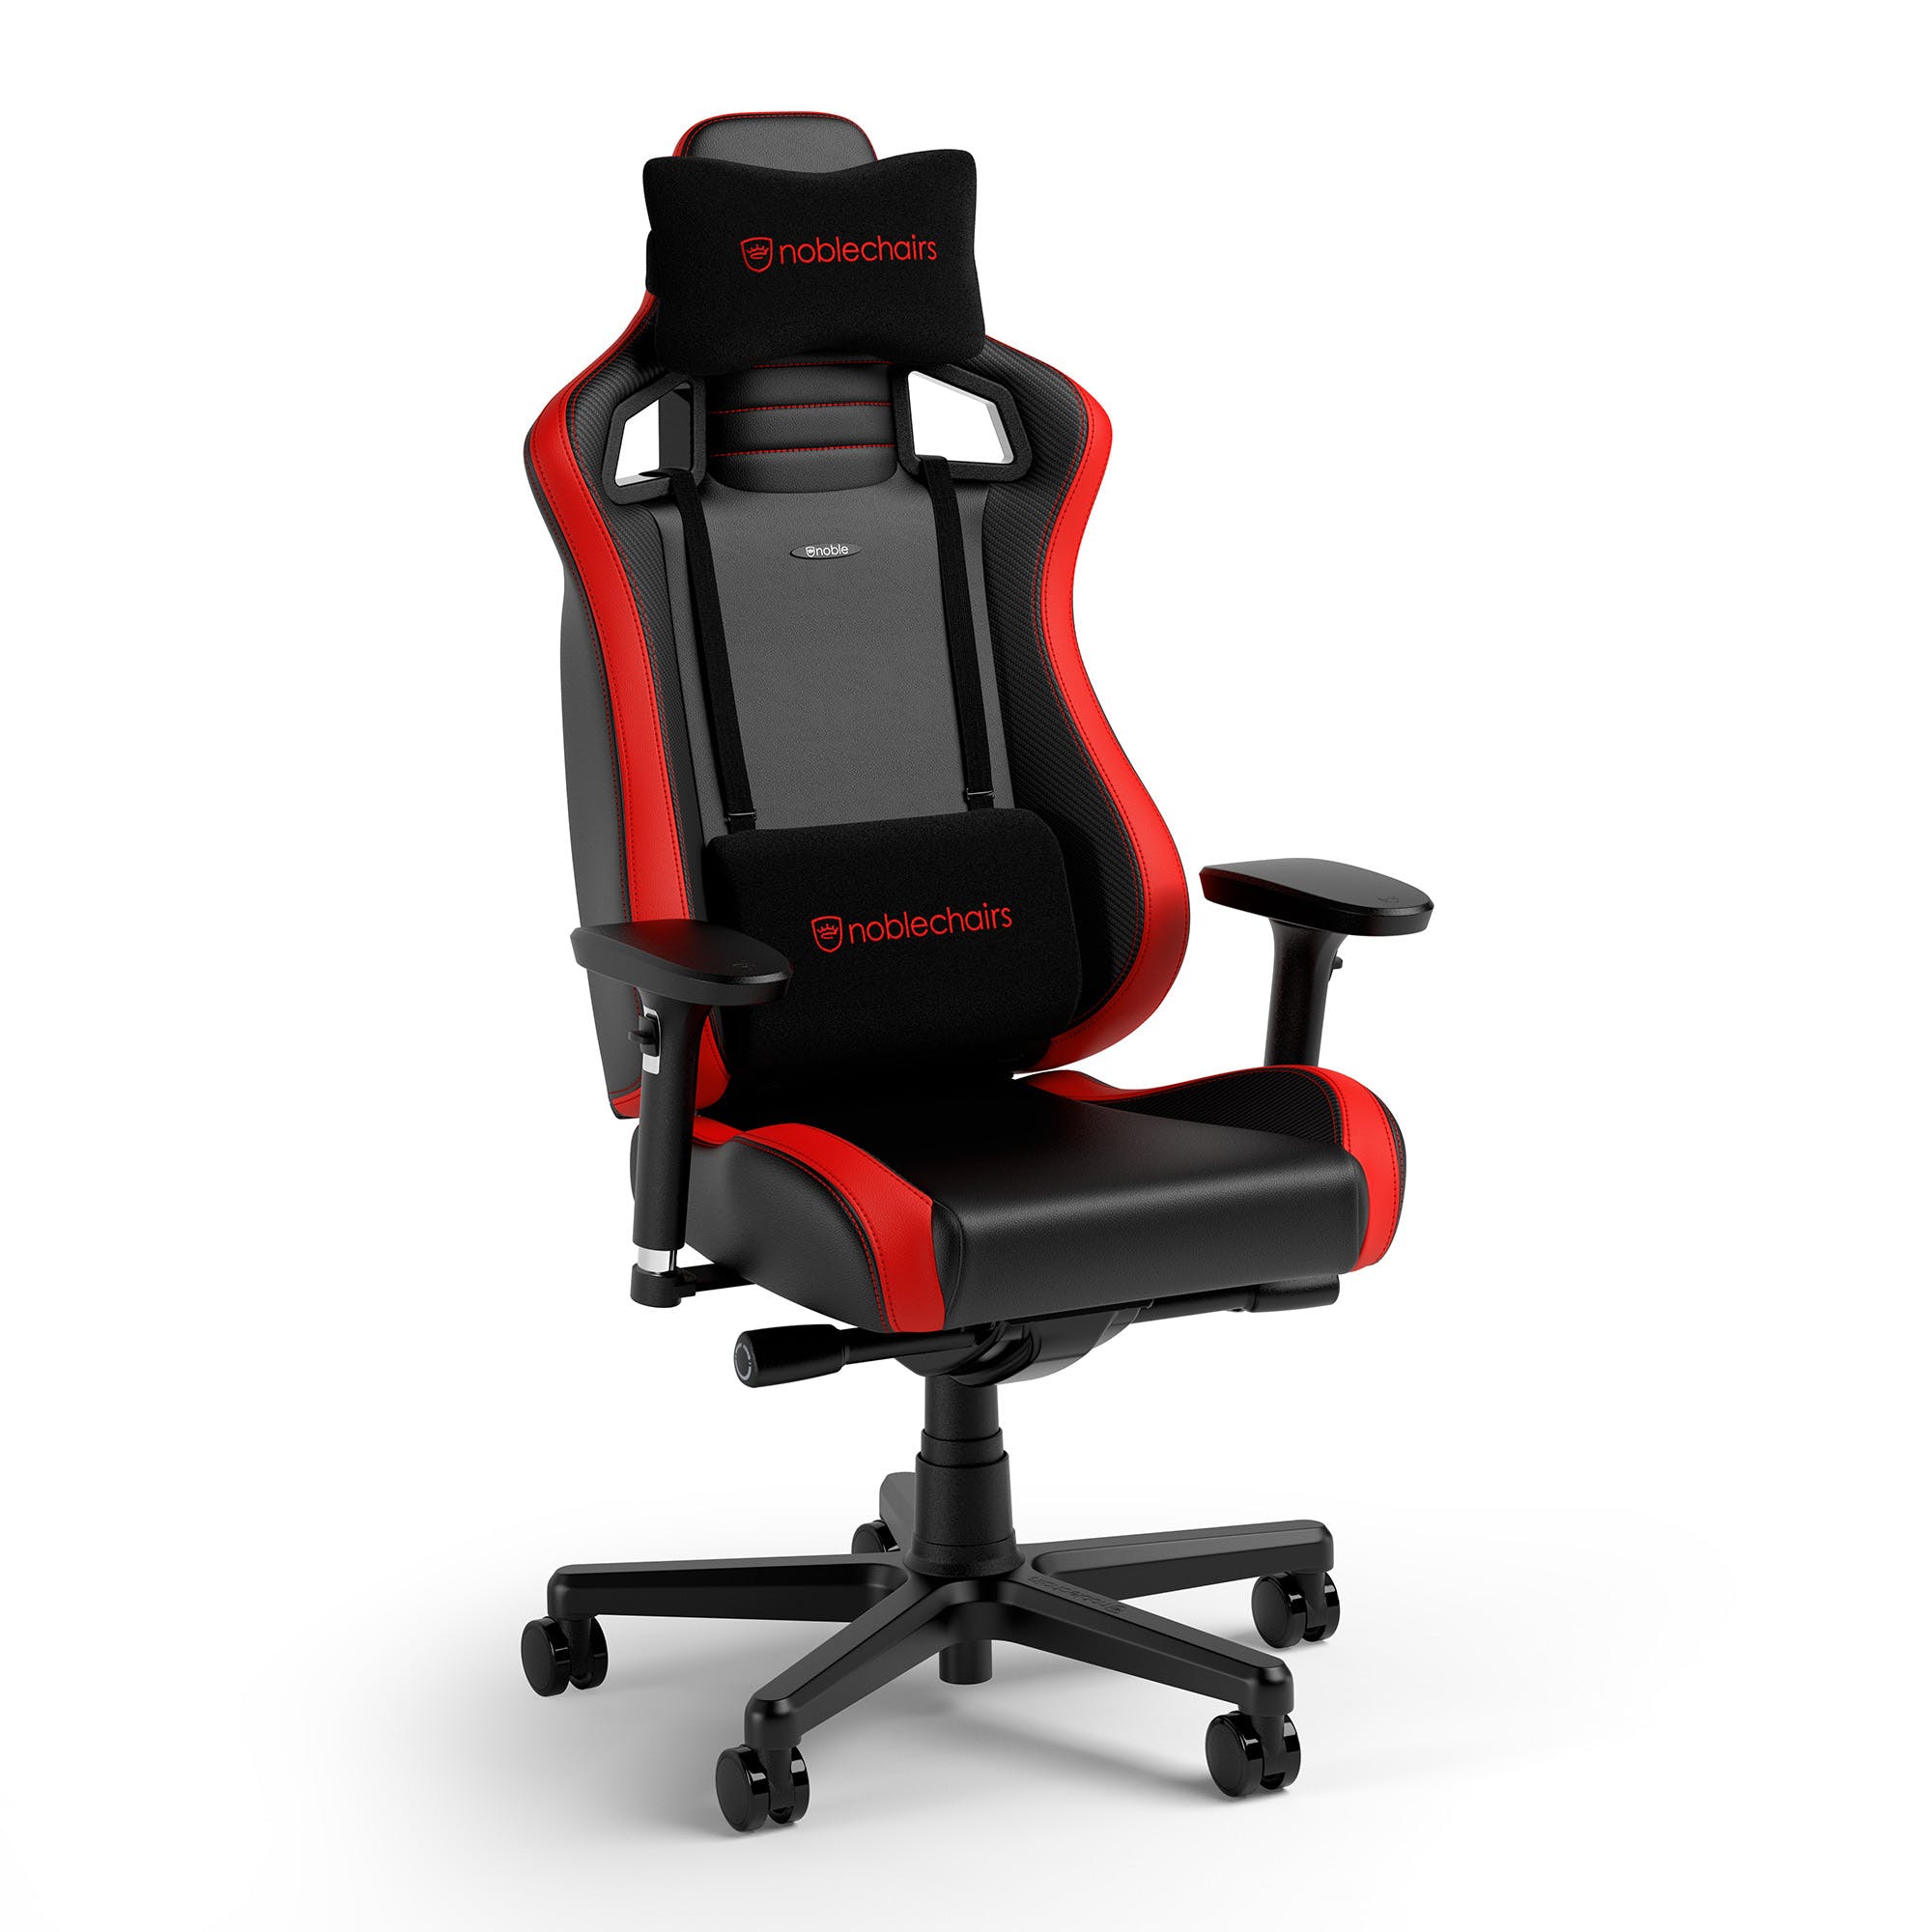 noblechairs - noblechairs EPIC Compact Gaming Chair - Carbon/Black/Red